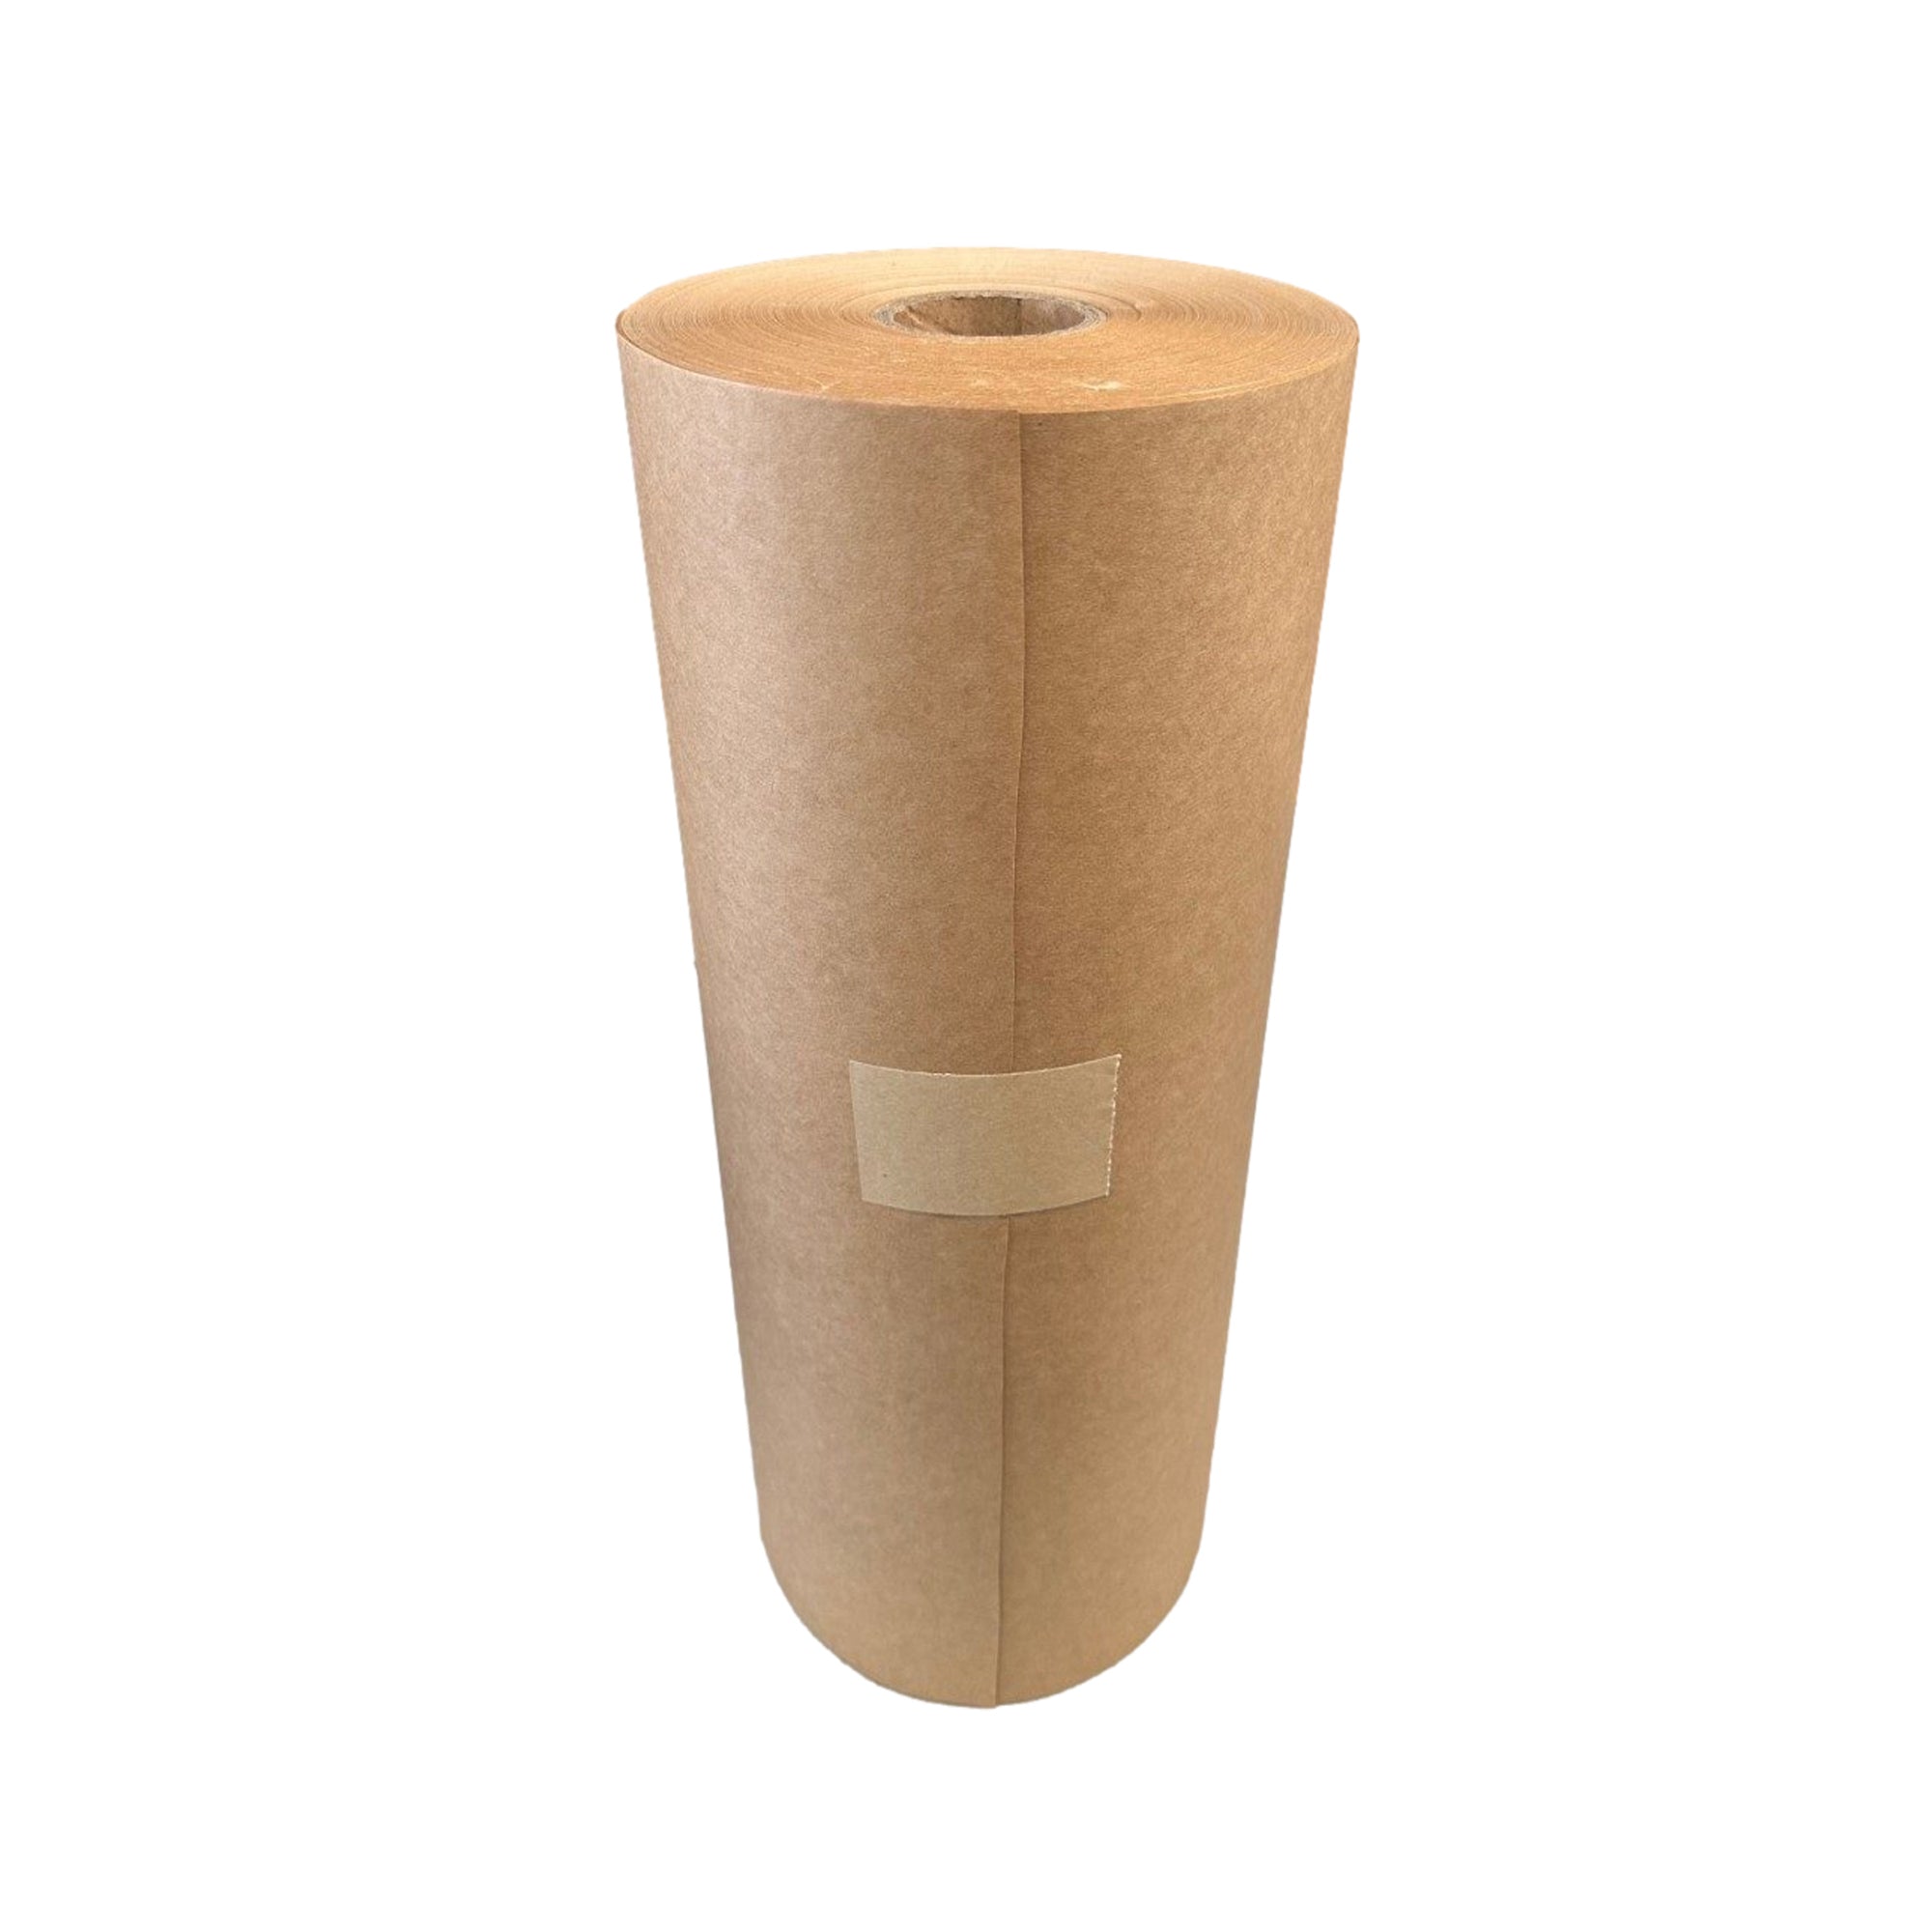 What are the uses of Kraft Paper in Packaging?